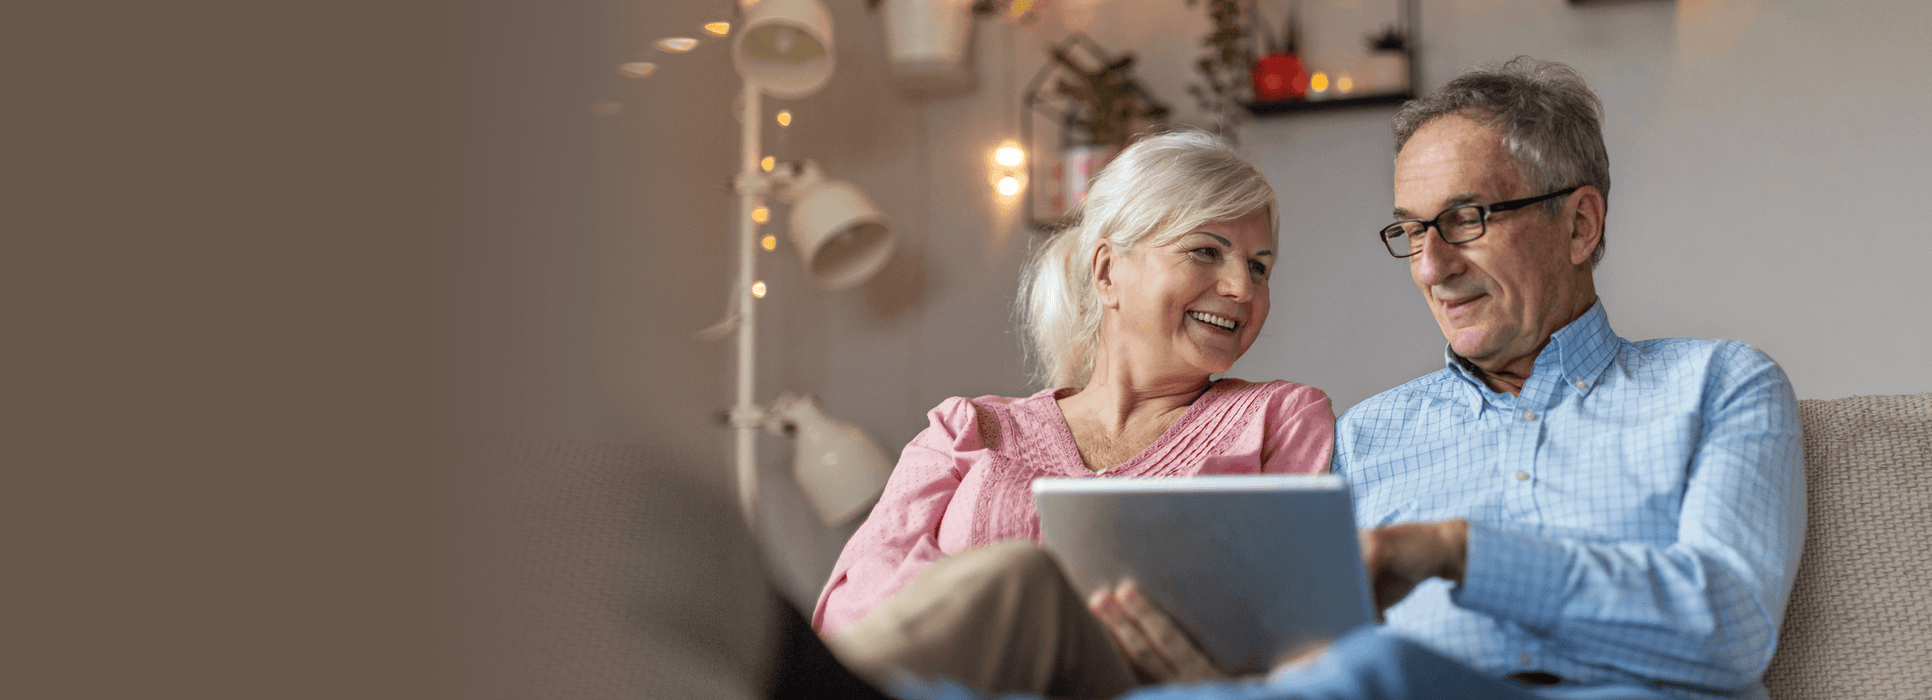 3 Smart home products that keep the elderly safe